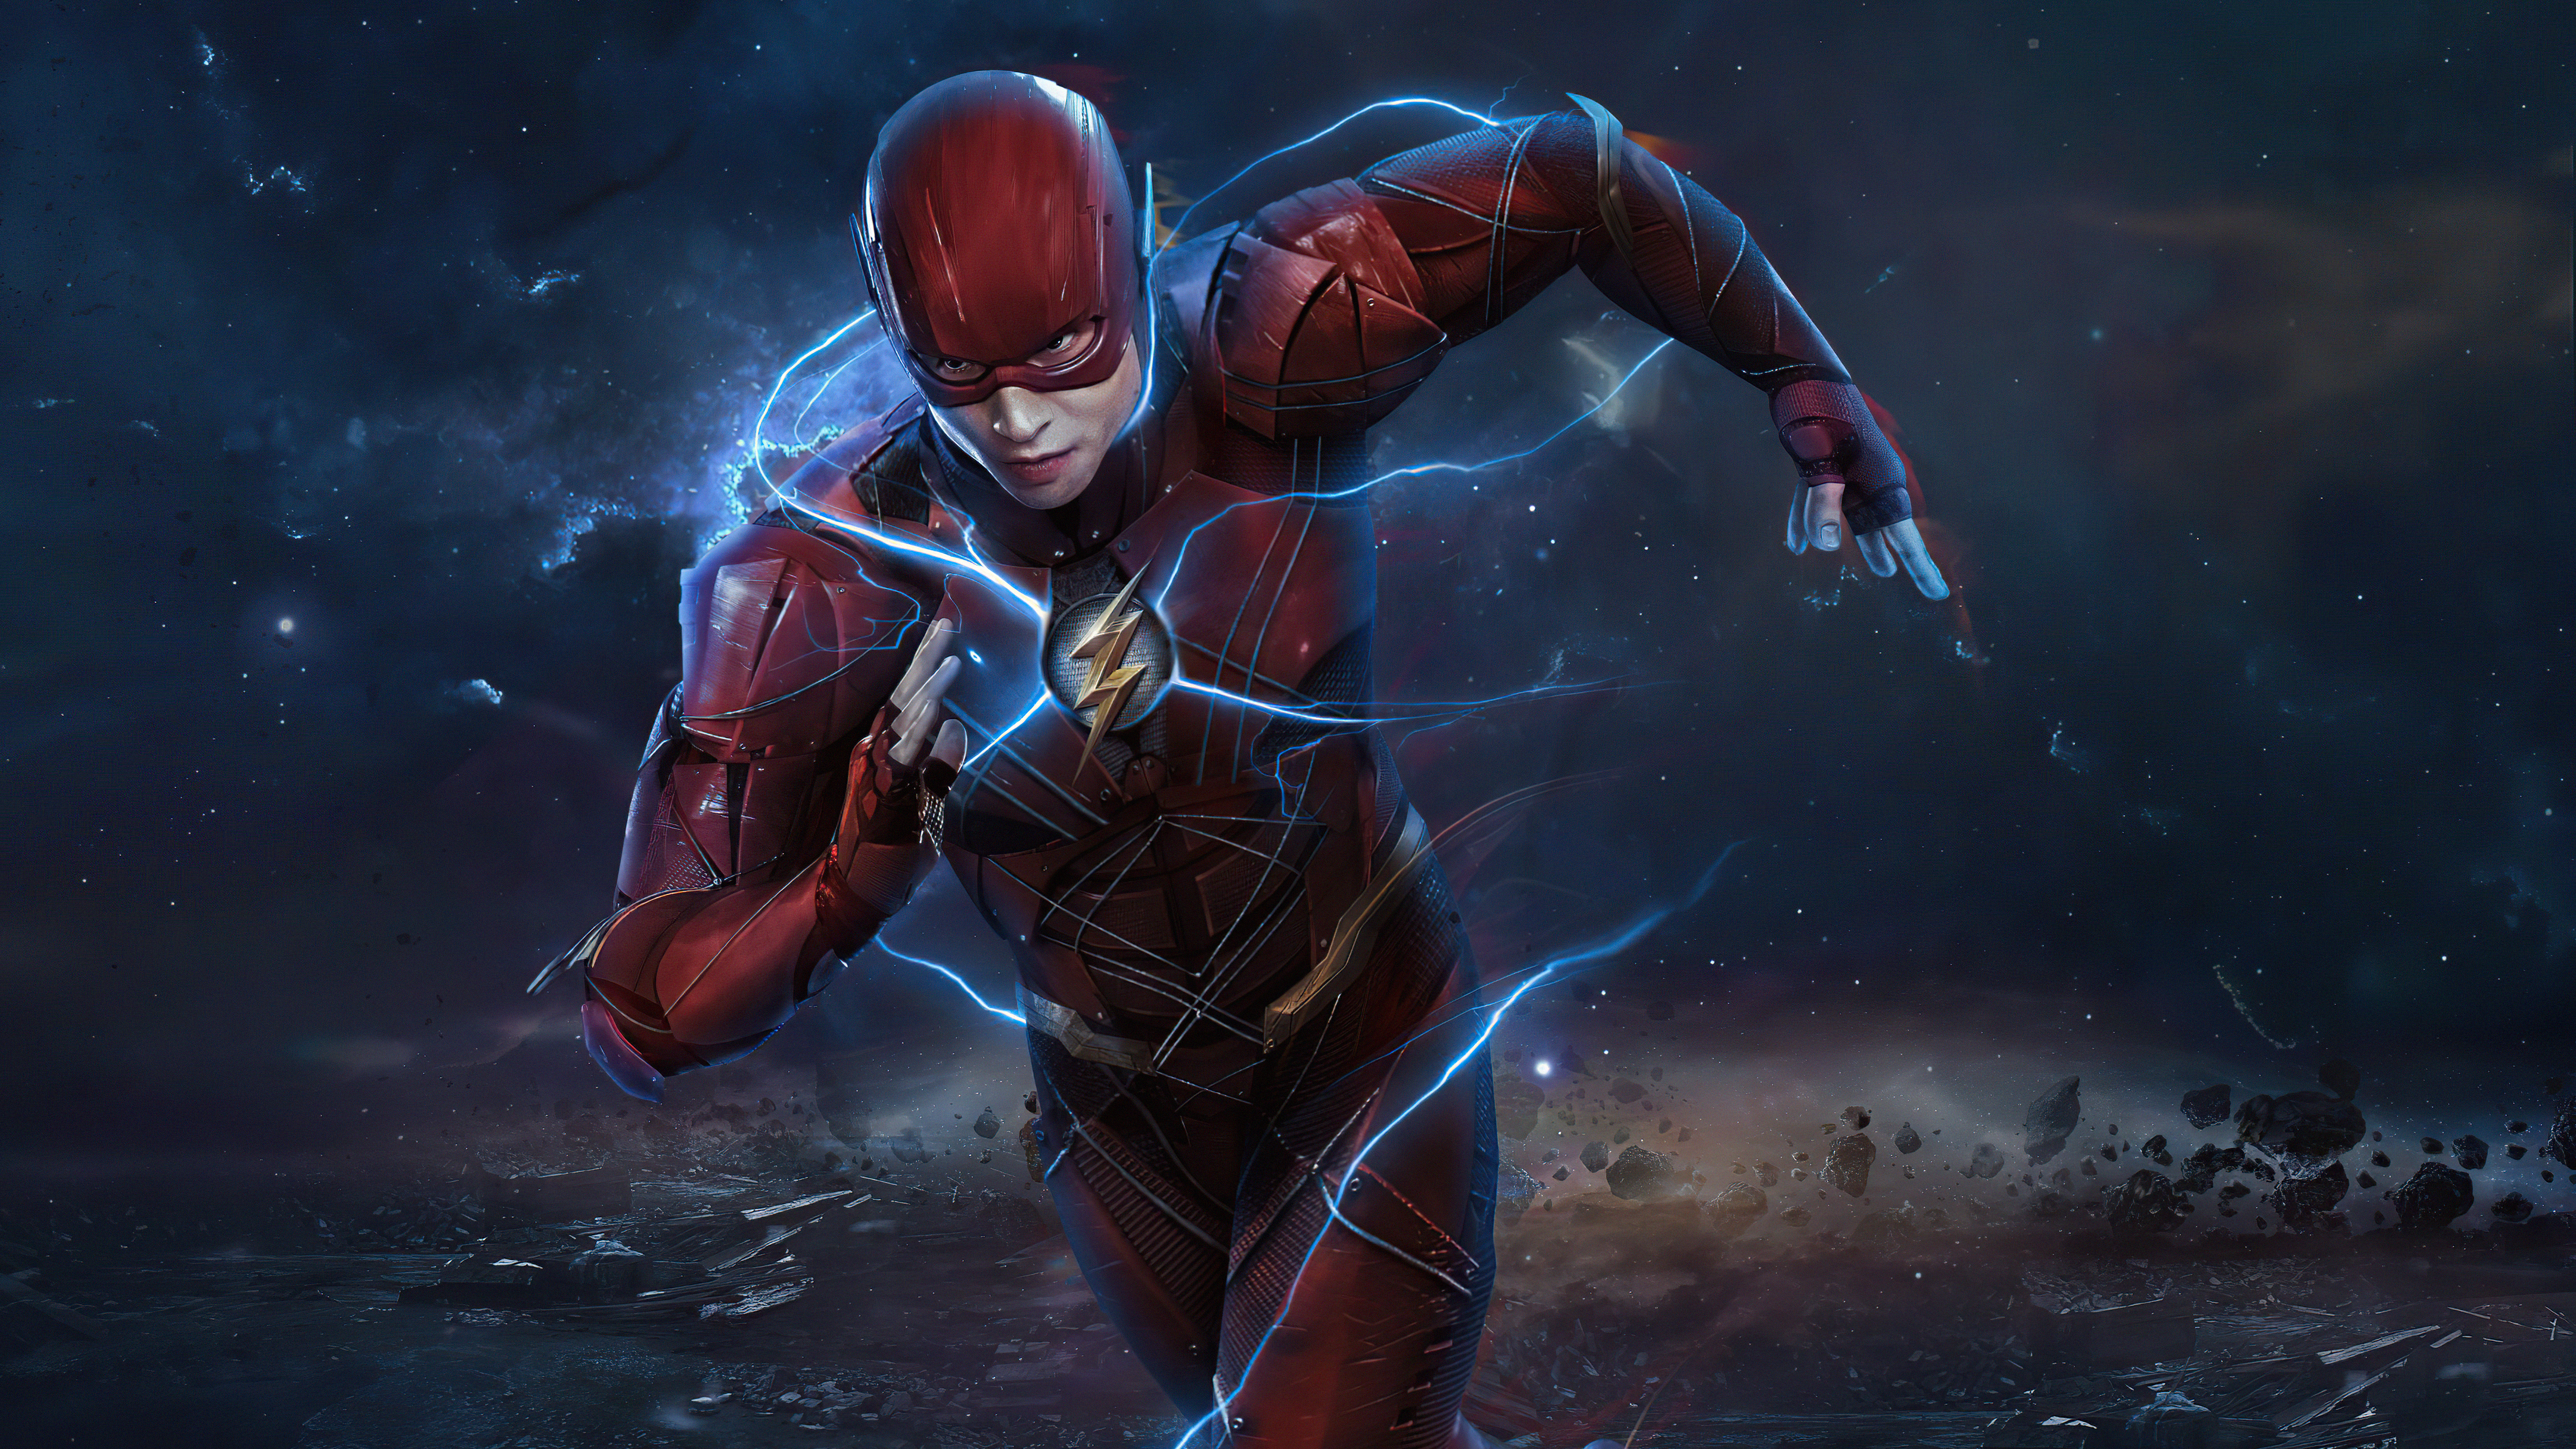 Flash Running Zack Synder Cut 5k, HD Superheroes, 4k Wallpaper, Image, Background, Photo and Picture